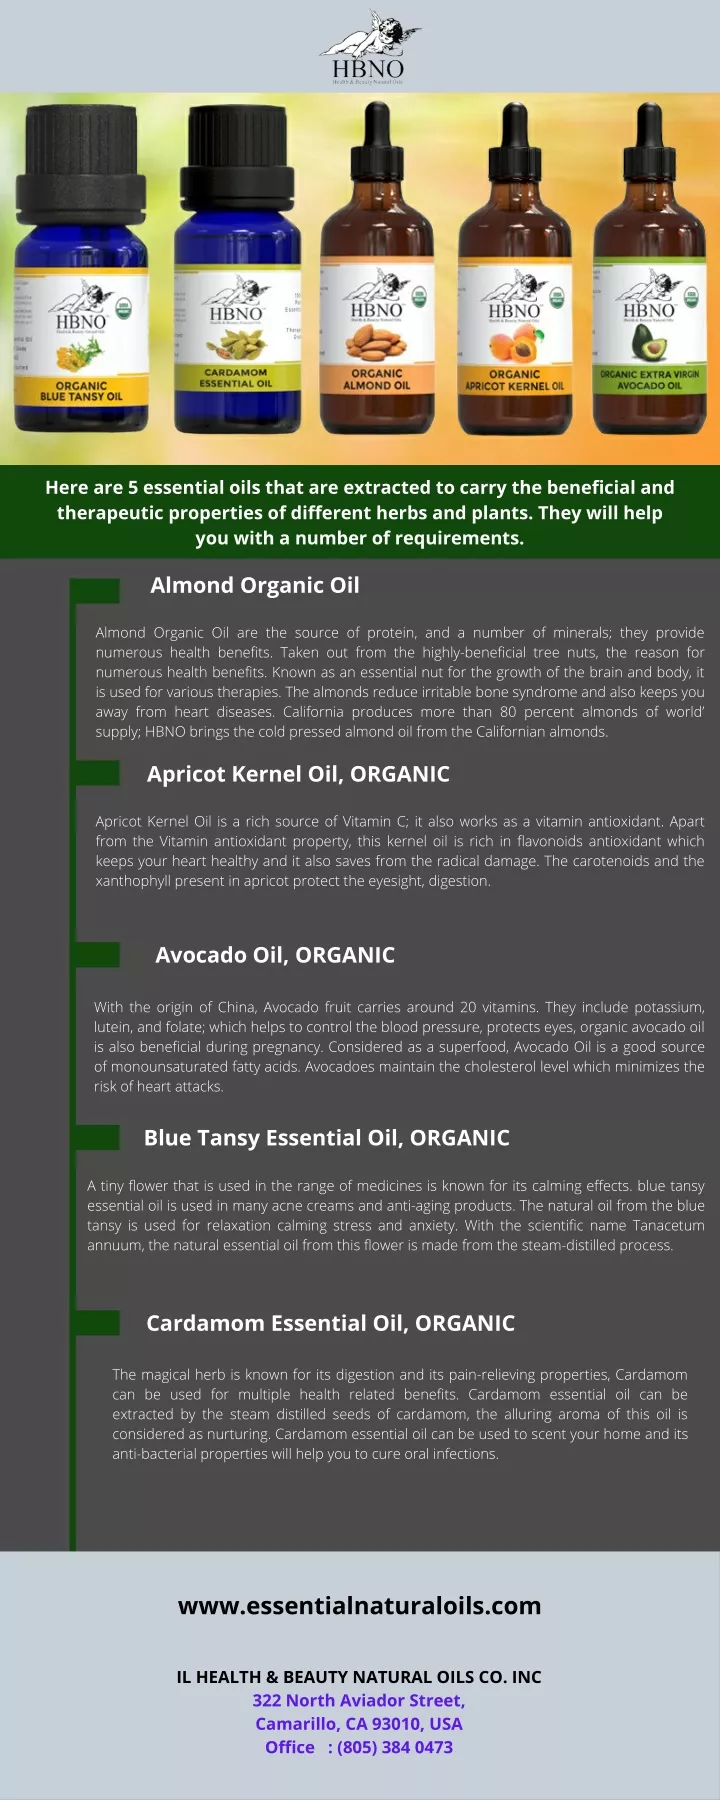 here are 5 essential oils that are extracted